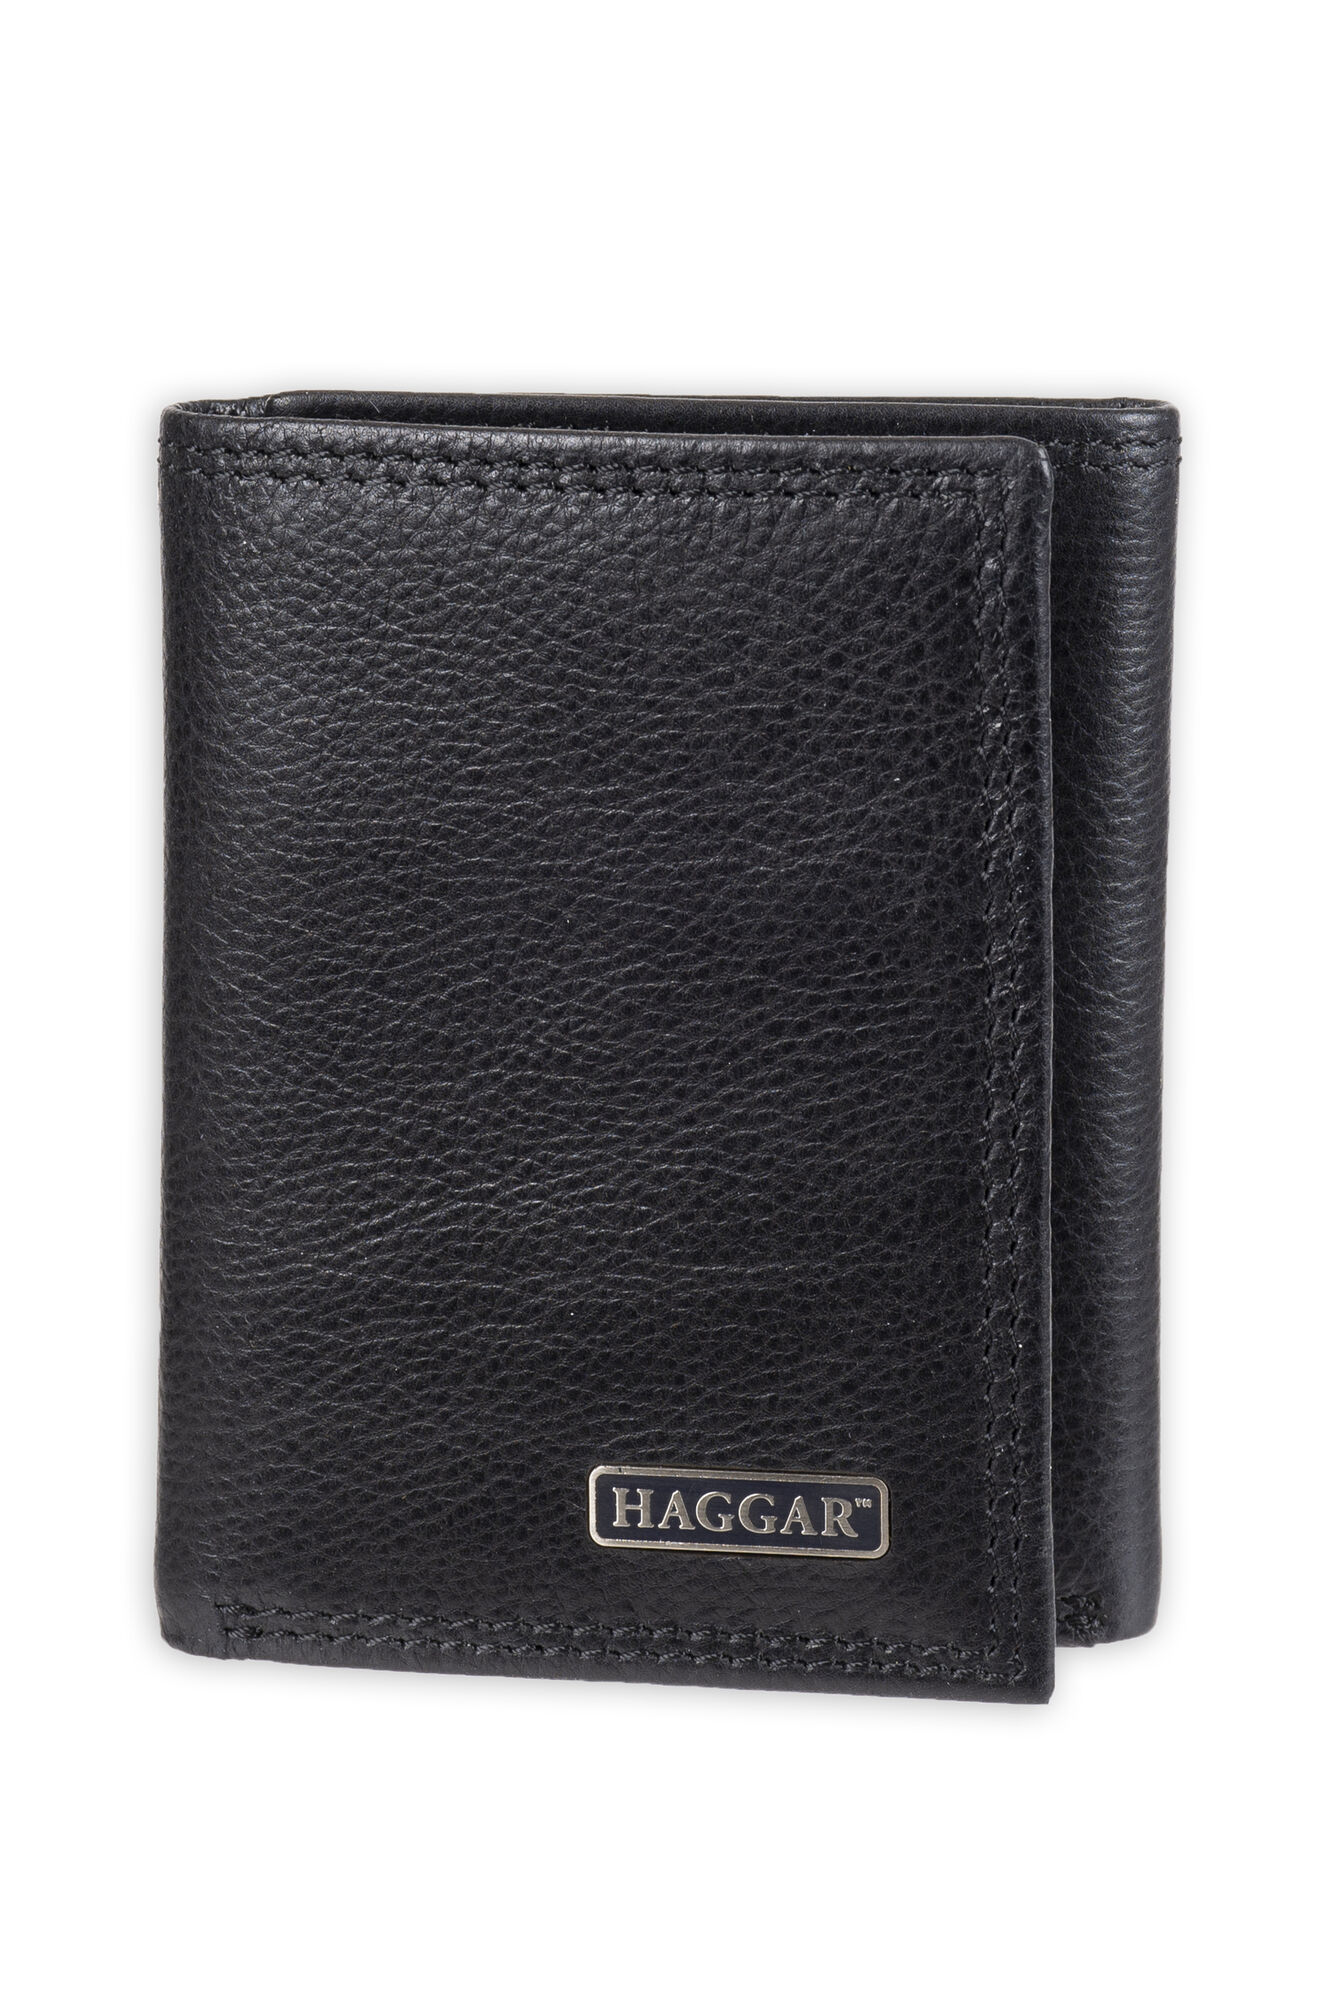 Haggar Rfid Atwood Trifold Wallet Black (31HH110001) photo